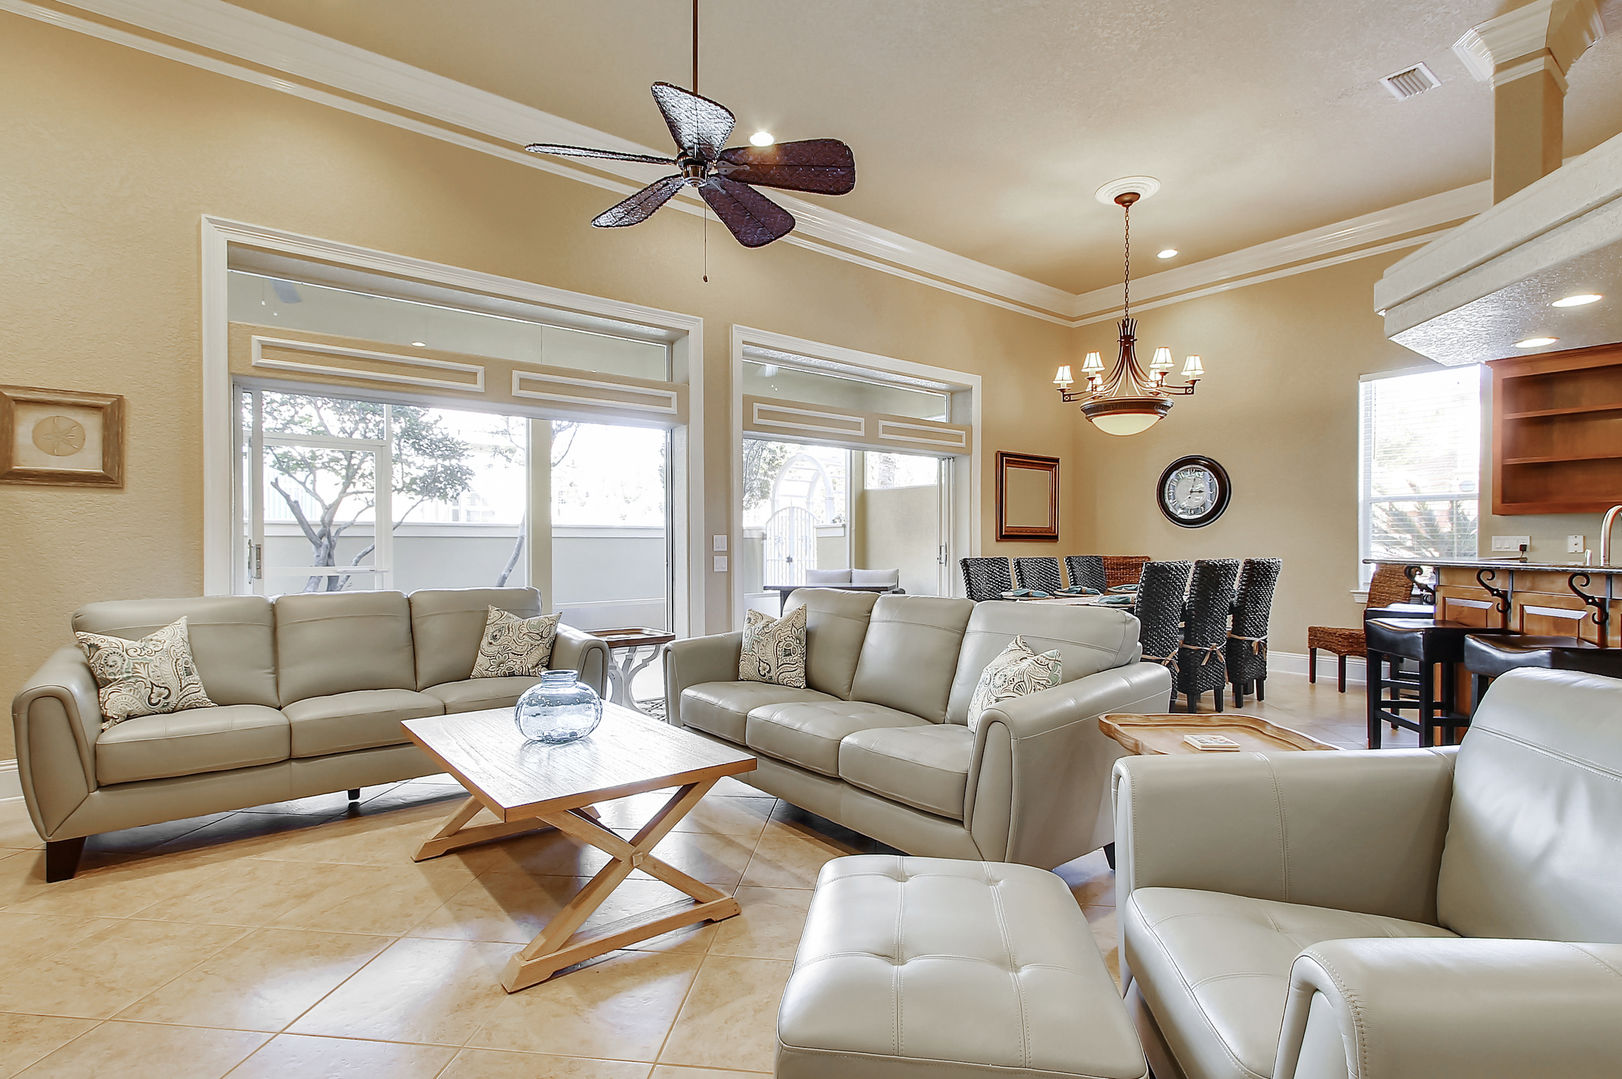 Forever Vacation Rentals living room in the Emerald Coast, Florida